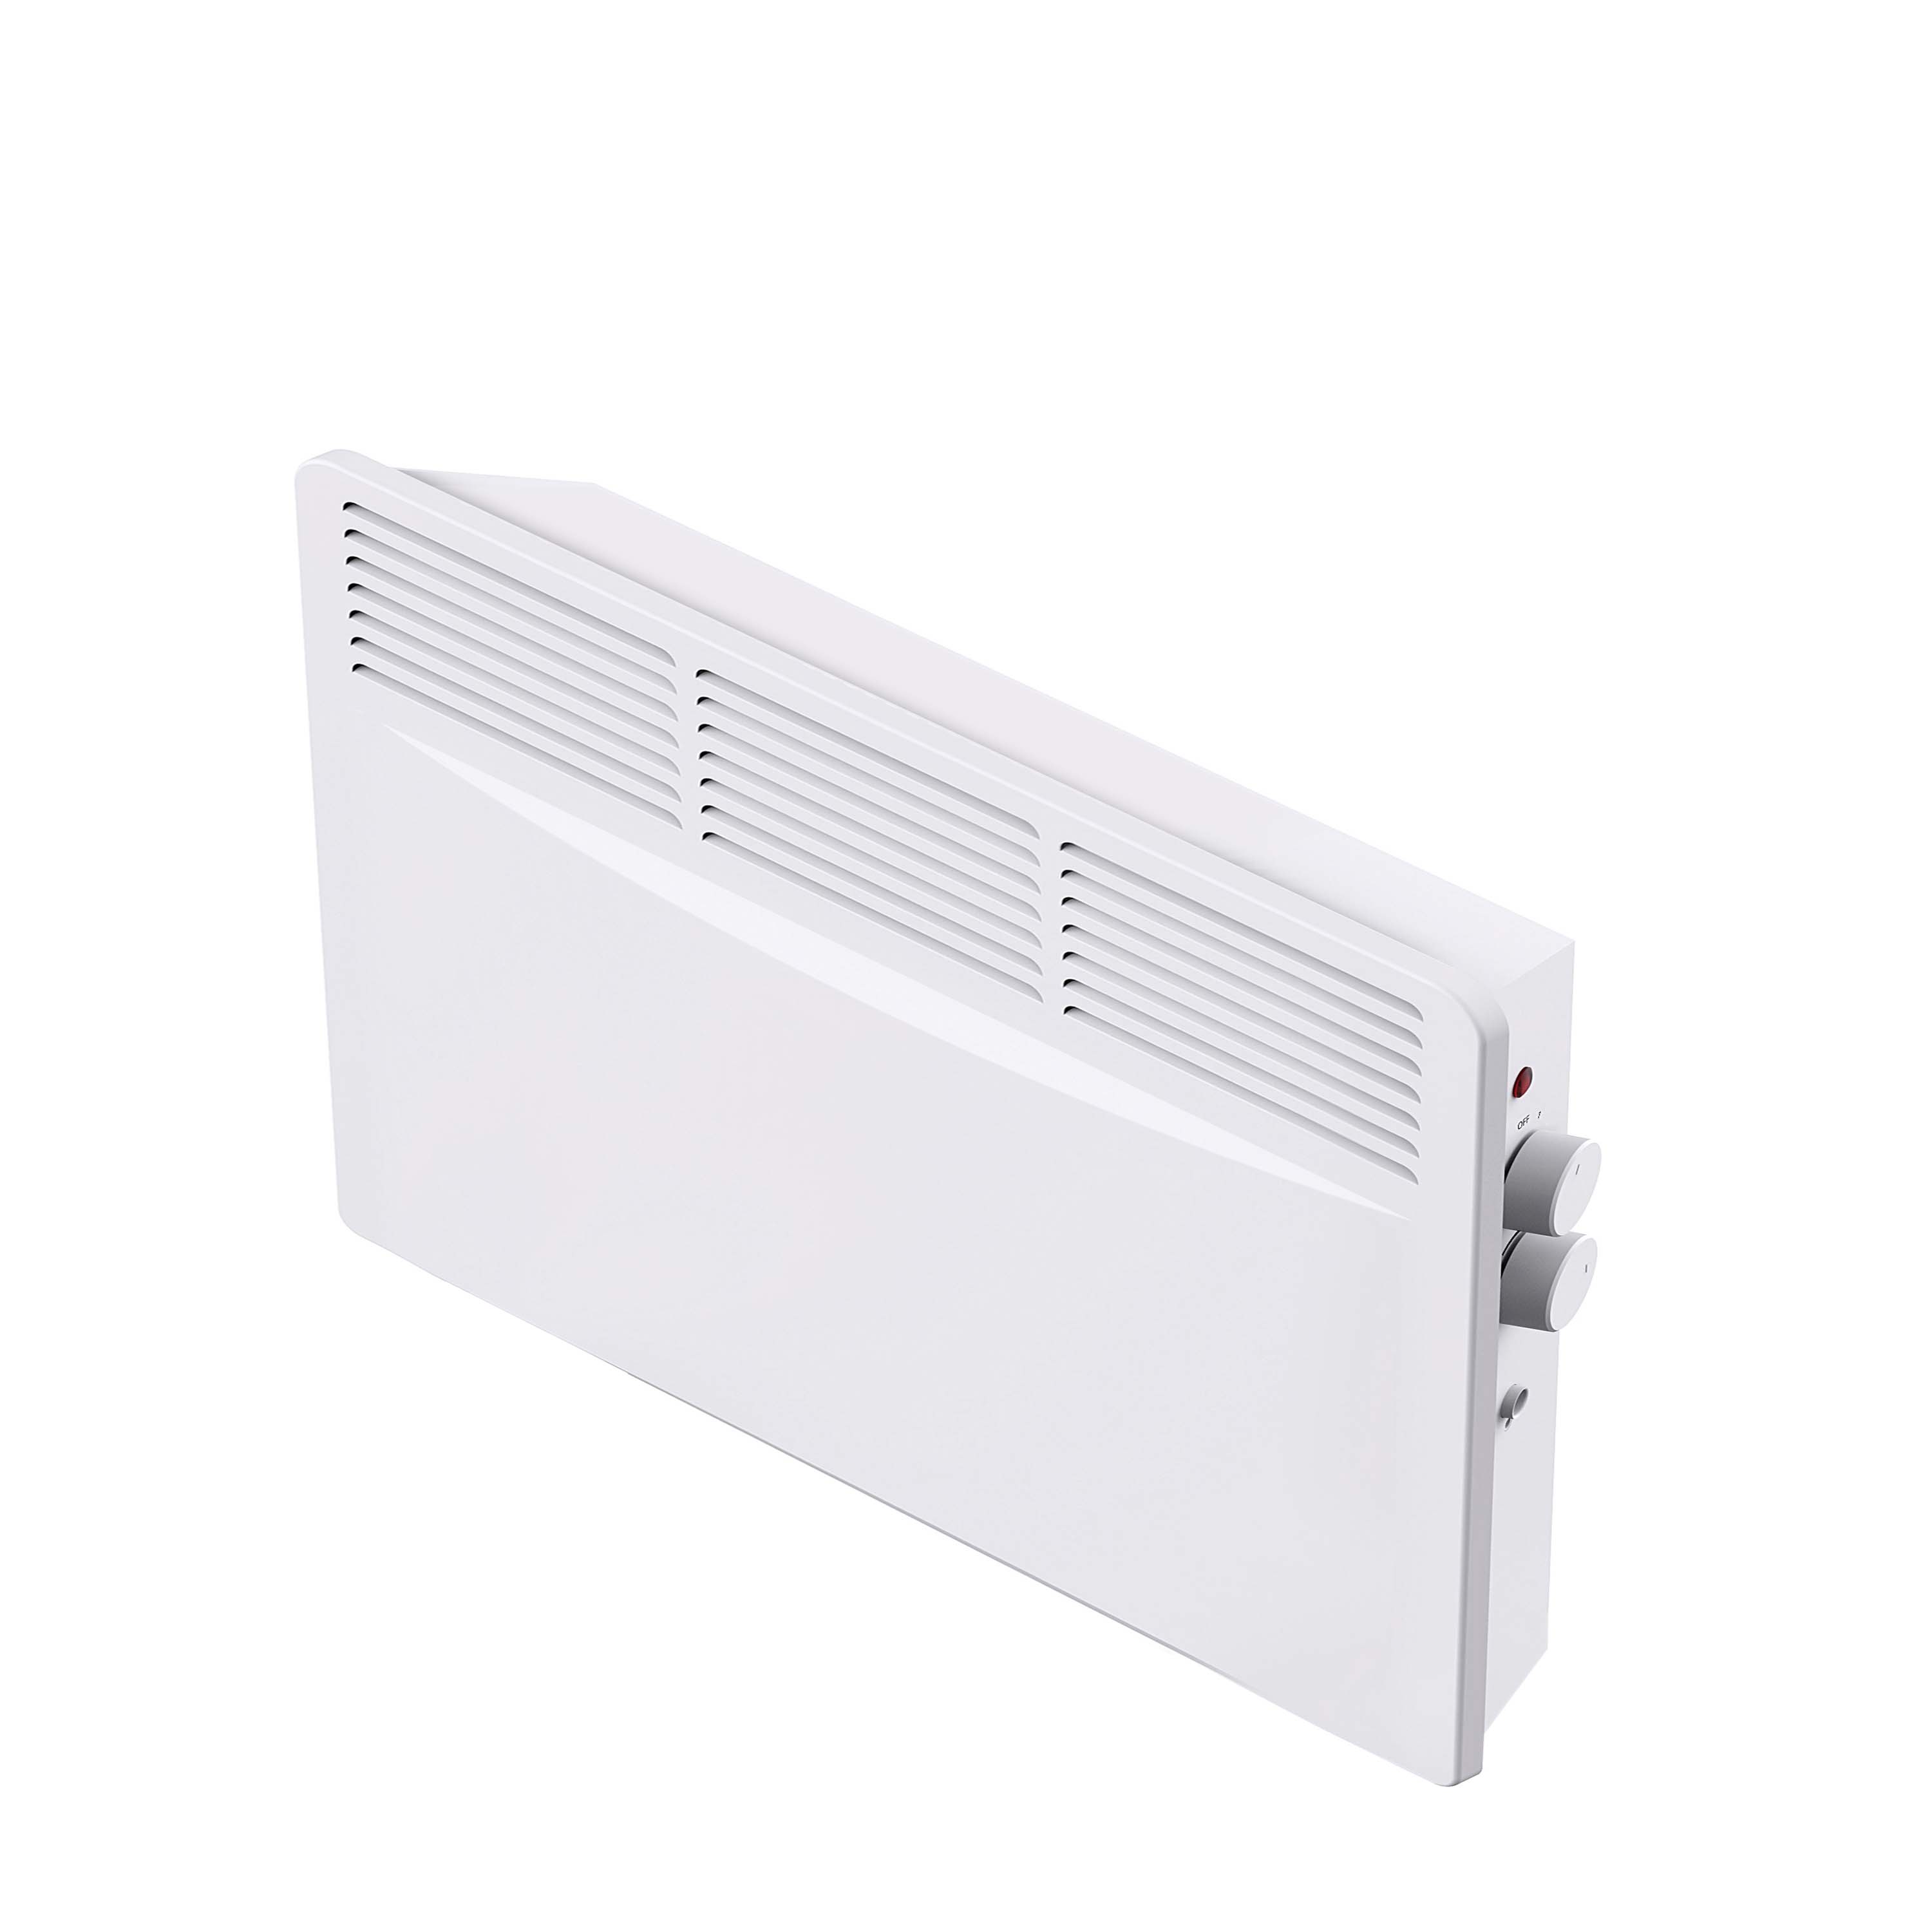 Convector Panel Heater with indicator light